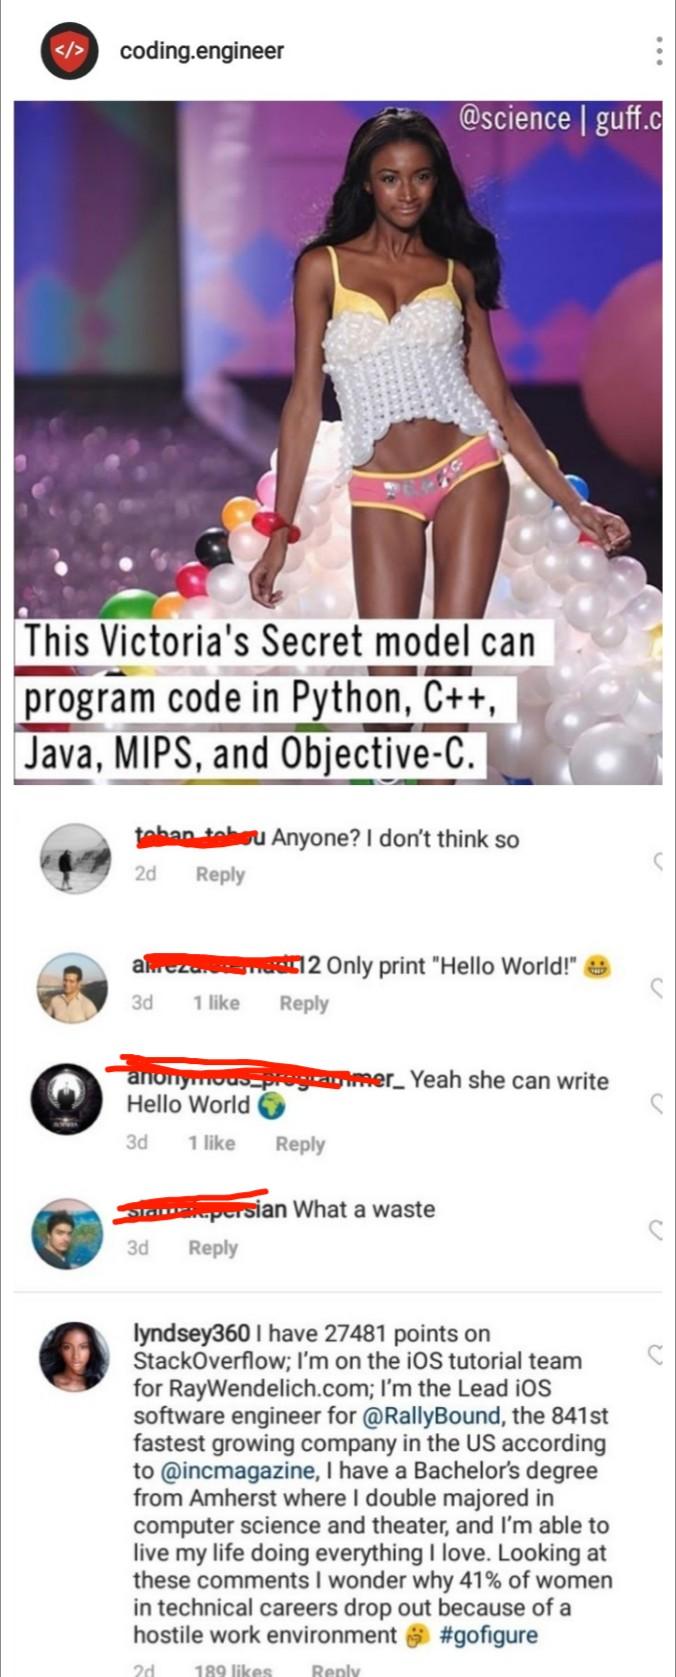 victorias secret model coding - coding.engineer | guff.c This Victoria's Secret model can program code in Python, C, Java, Mips, and ObjectiveC. teban tahou Anyone? I don't think so 2d acca 3d 1 2 Only print "Hello World!" 8 mer_ Yeah she can write anonym